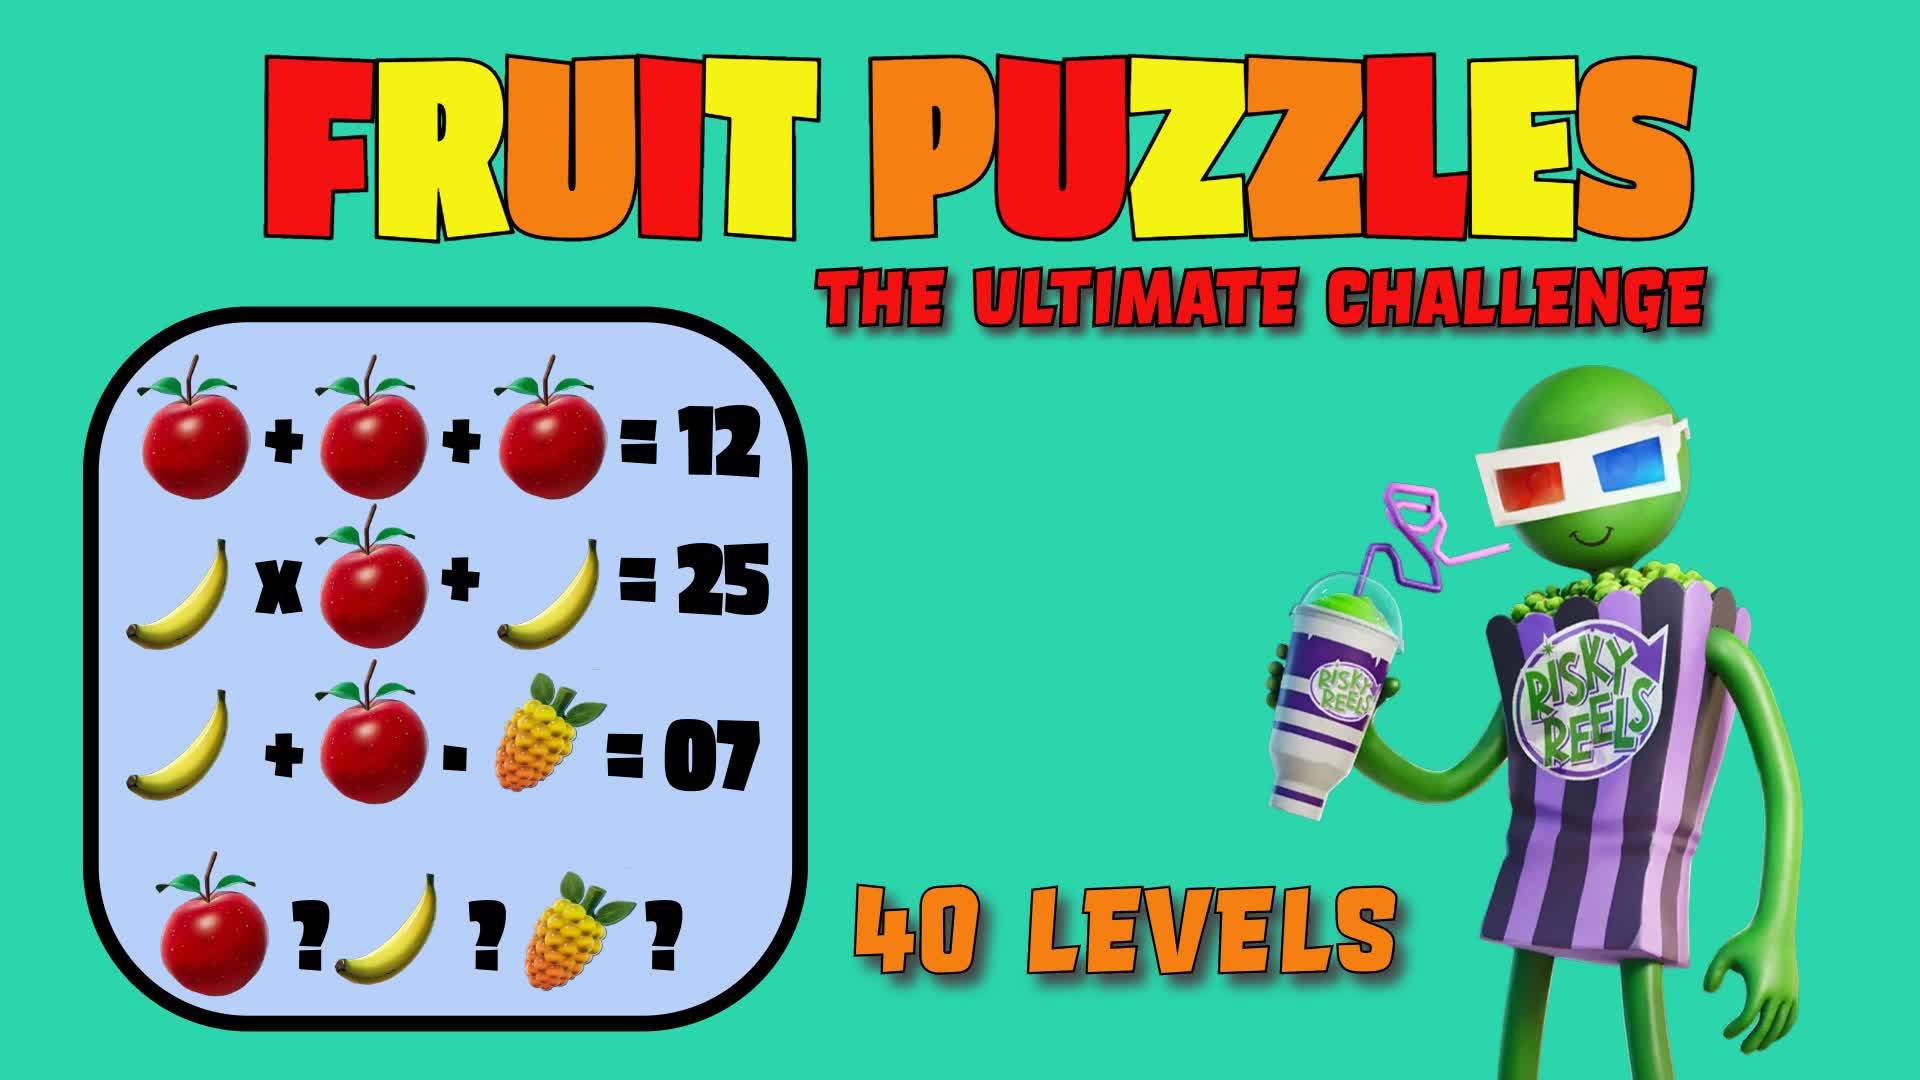 Fruit puzzles - The ultimate challenge